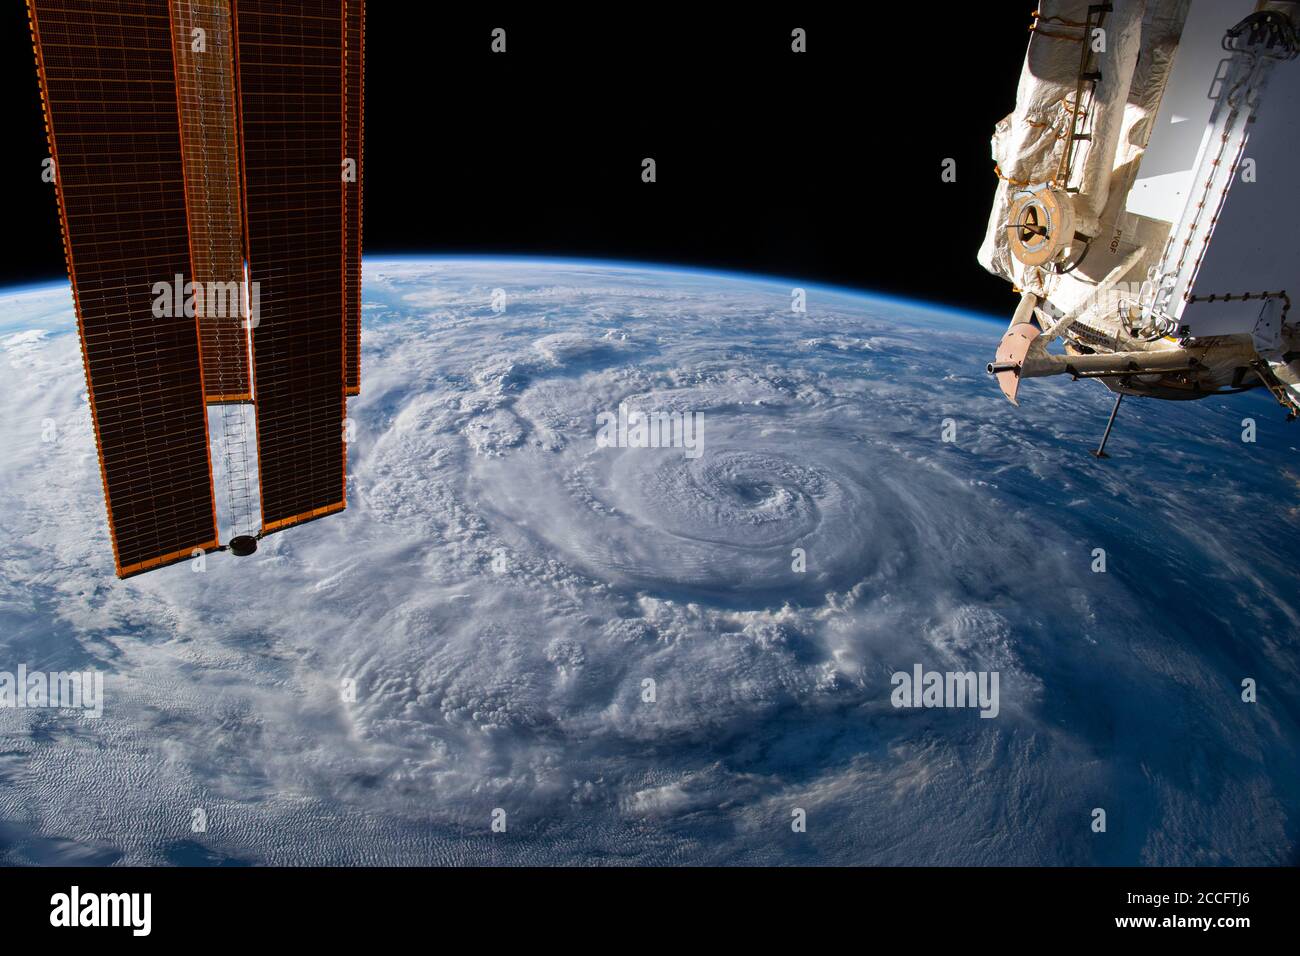 ISS - 19 August 2020 - Hurricane Genevieve is pictured off the Pacific coast of Mexico from the International Space Station - Photo: Geopix/NASA/Alamy Stock Photo